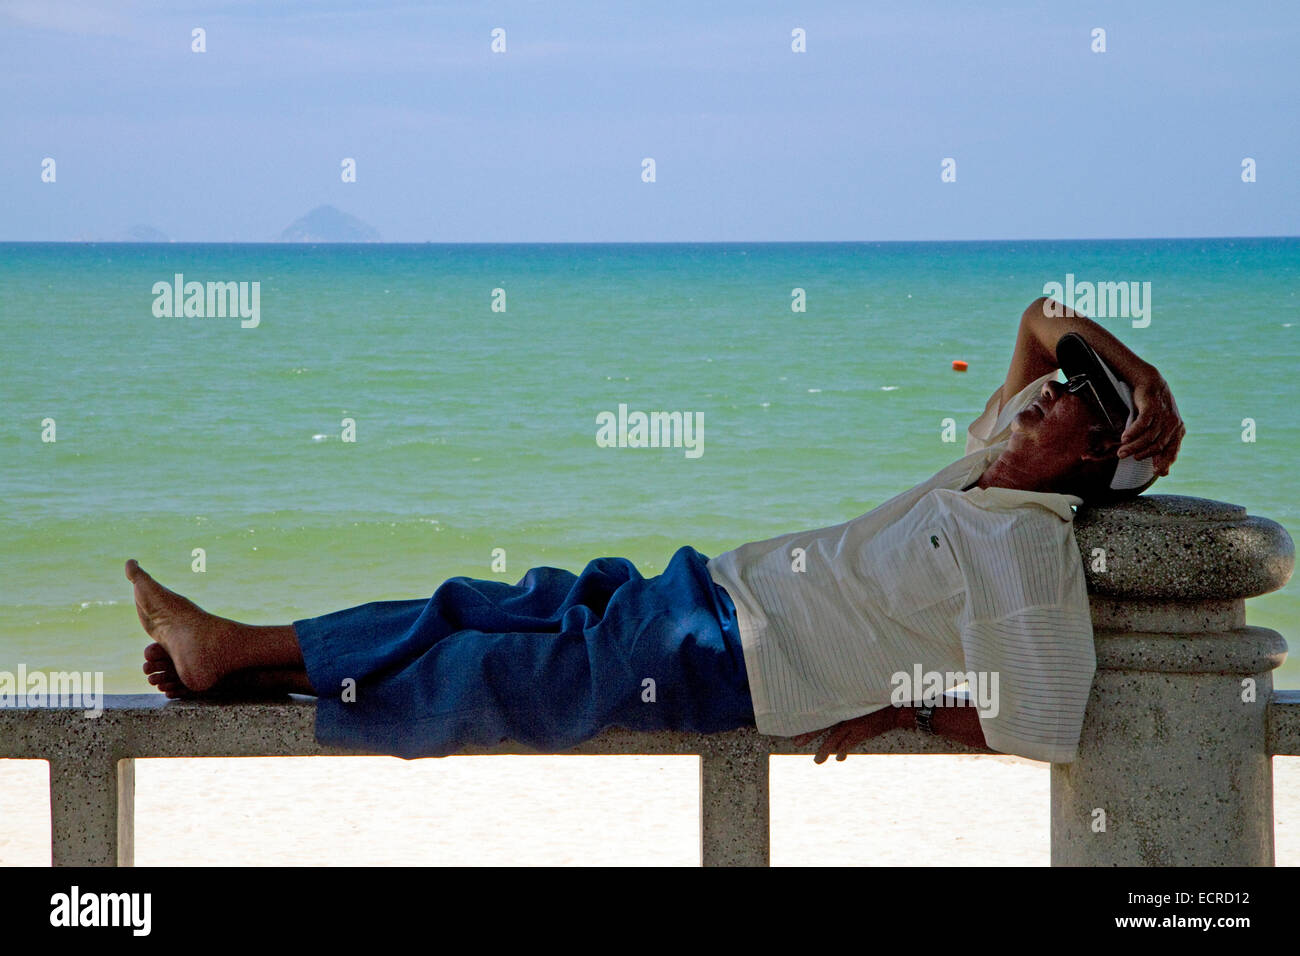 Man taking a nap on a bench at the beach in Nha Trang, Vietnam. Stock Photo